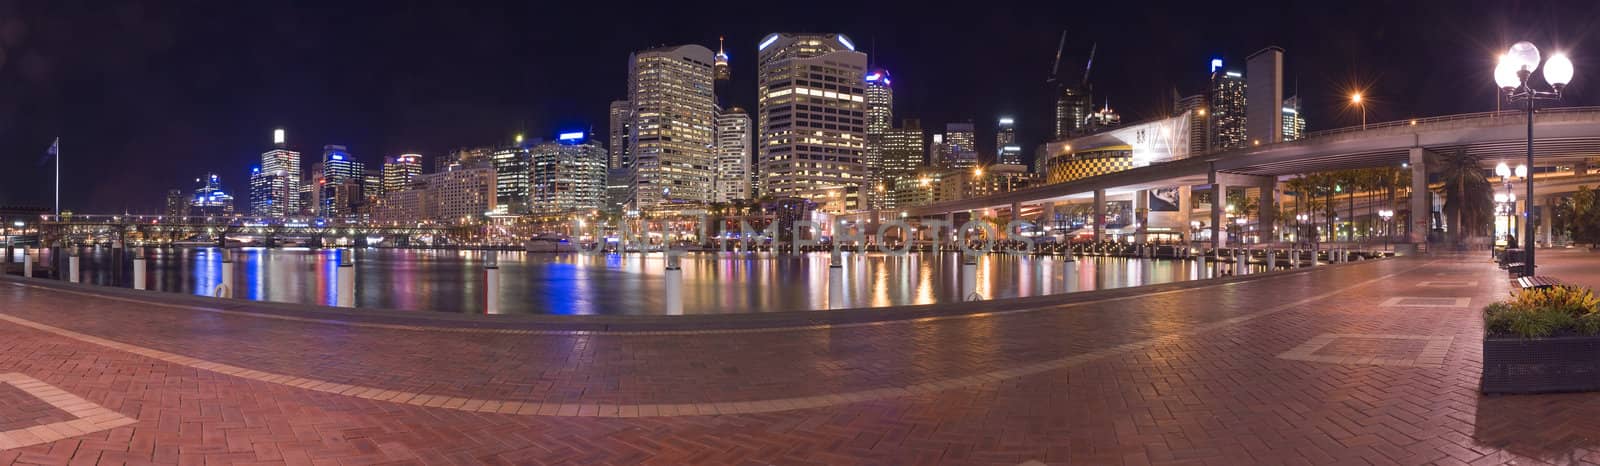 darling harbour panorama by rorem